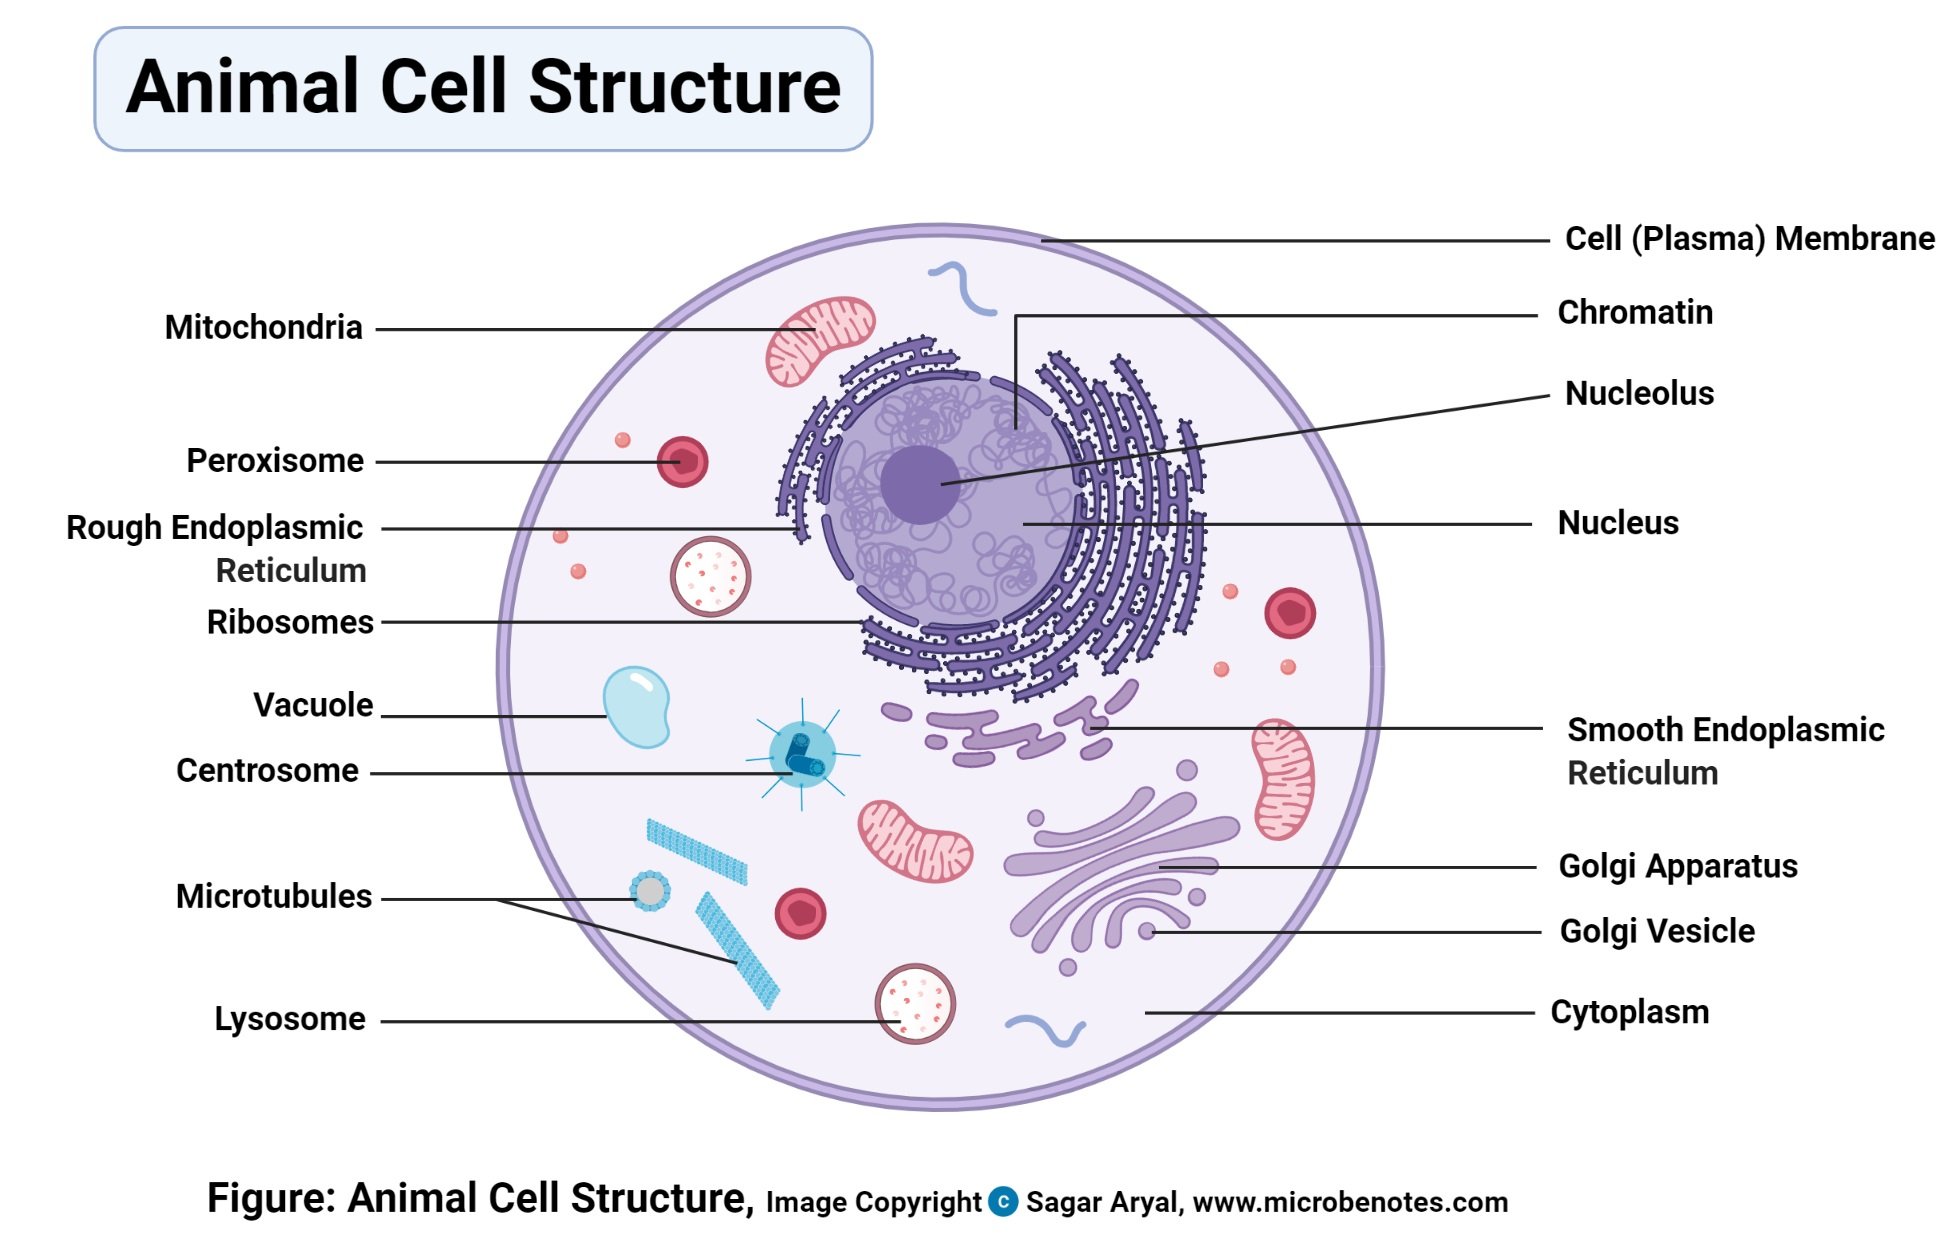 how do cell organelles work together